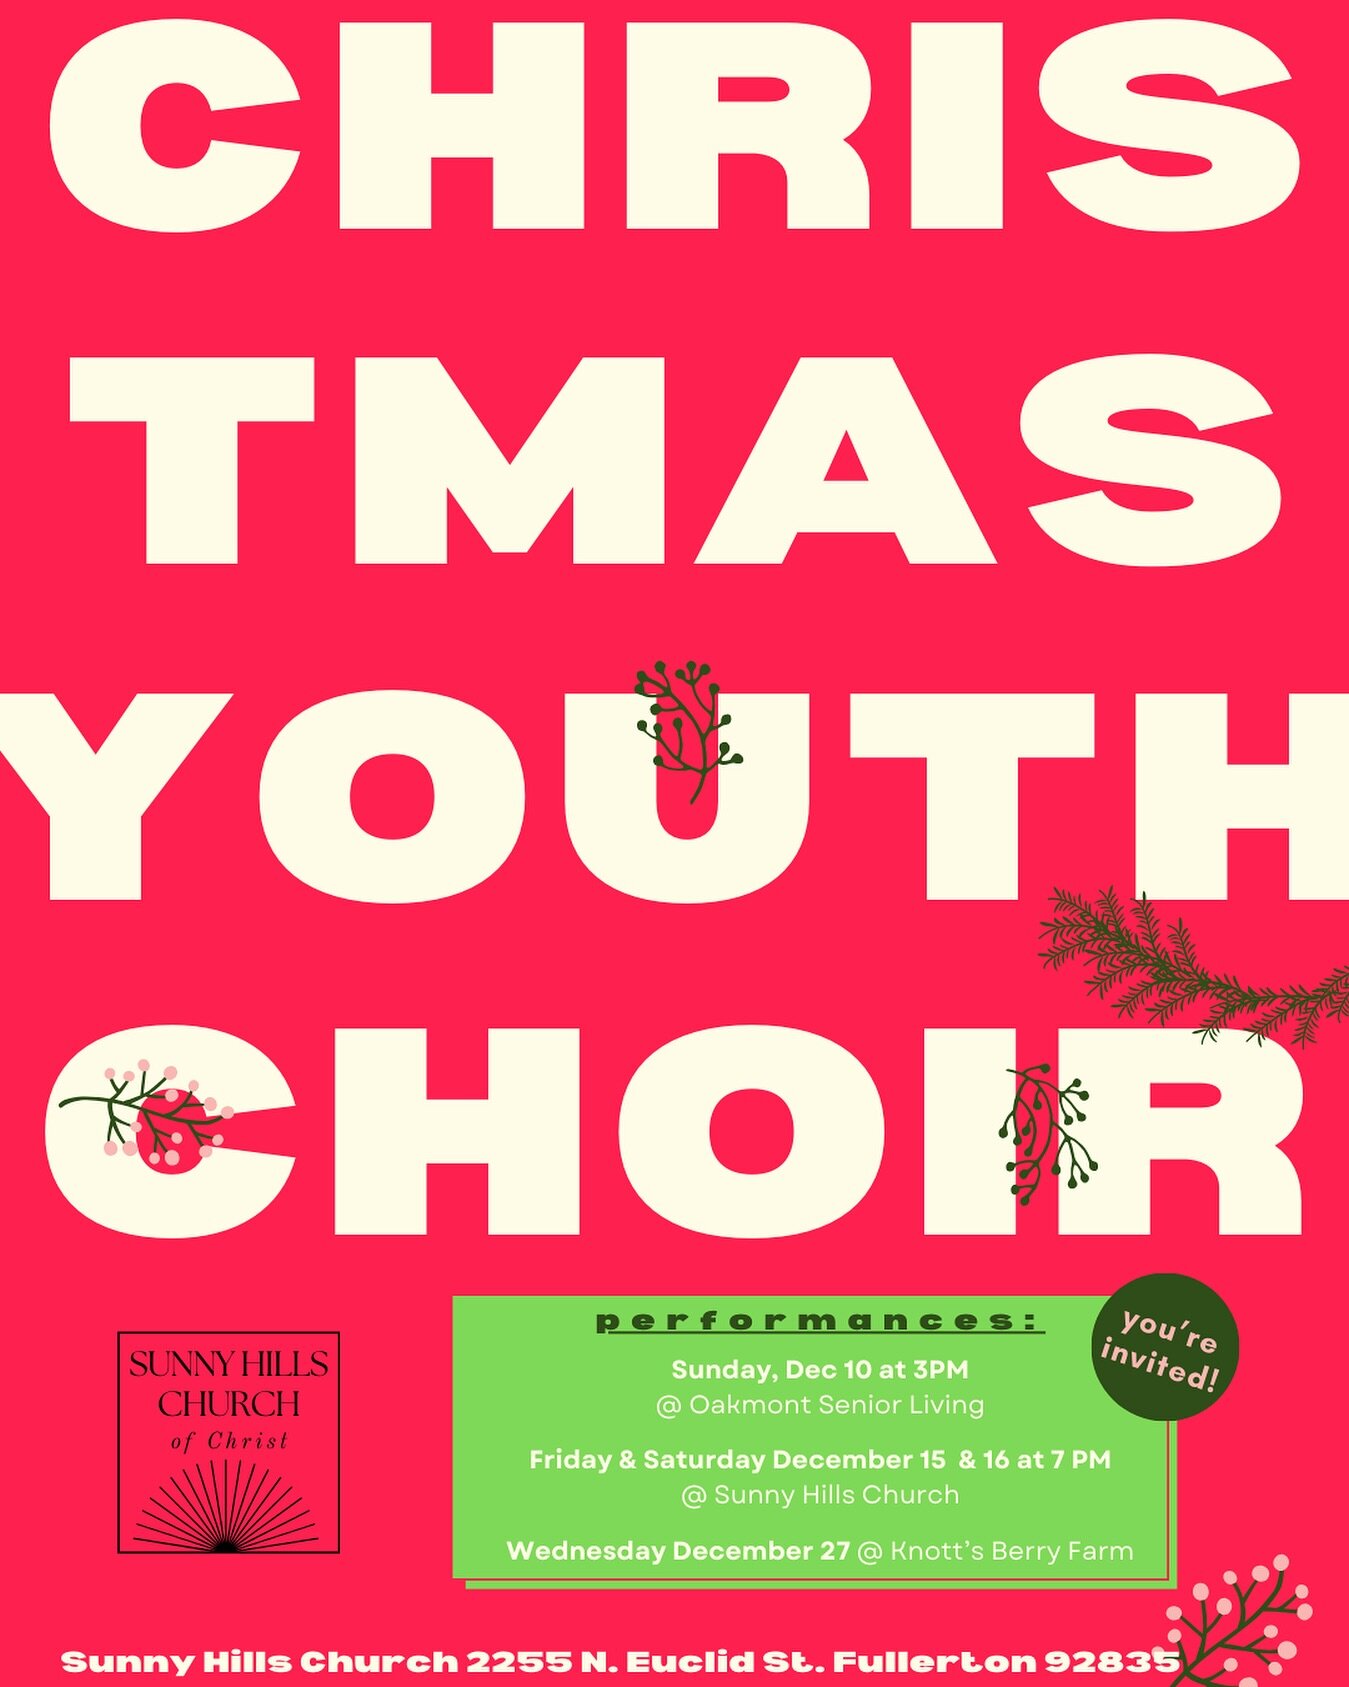 𝐂𝐡𝐫𝐢𝐬𝐭𝐦𝐚𝐬 𝐘𝐨𝐮𝐭𝐡 𝐂𝐡𝐨𝐢𝐫

Come support our talented group of students at their upcoming choir performances! They have two performances at the church this weekend on the 15th and 16th at 7pm, as well as a performance at Knott&rsquo;s B